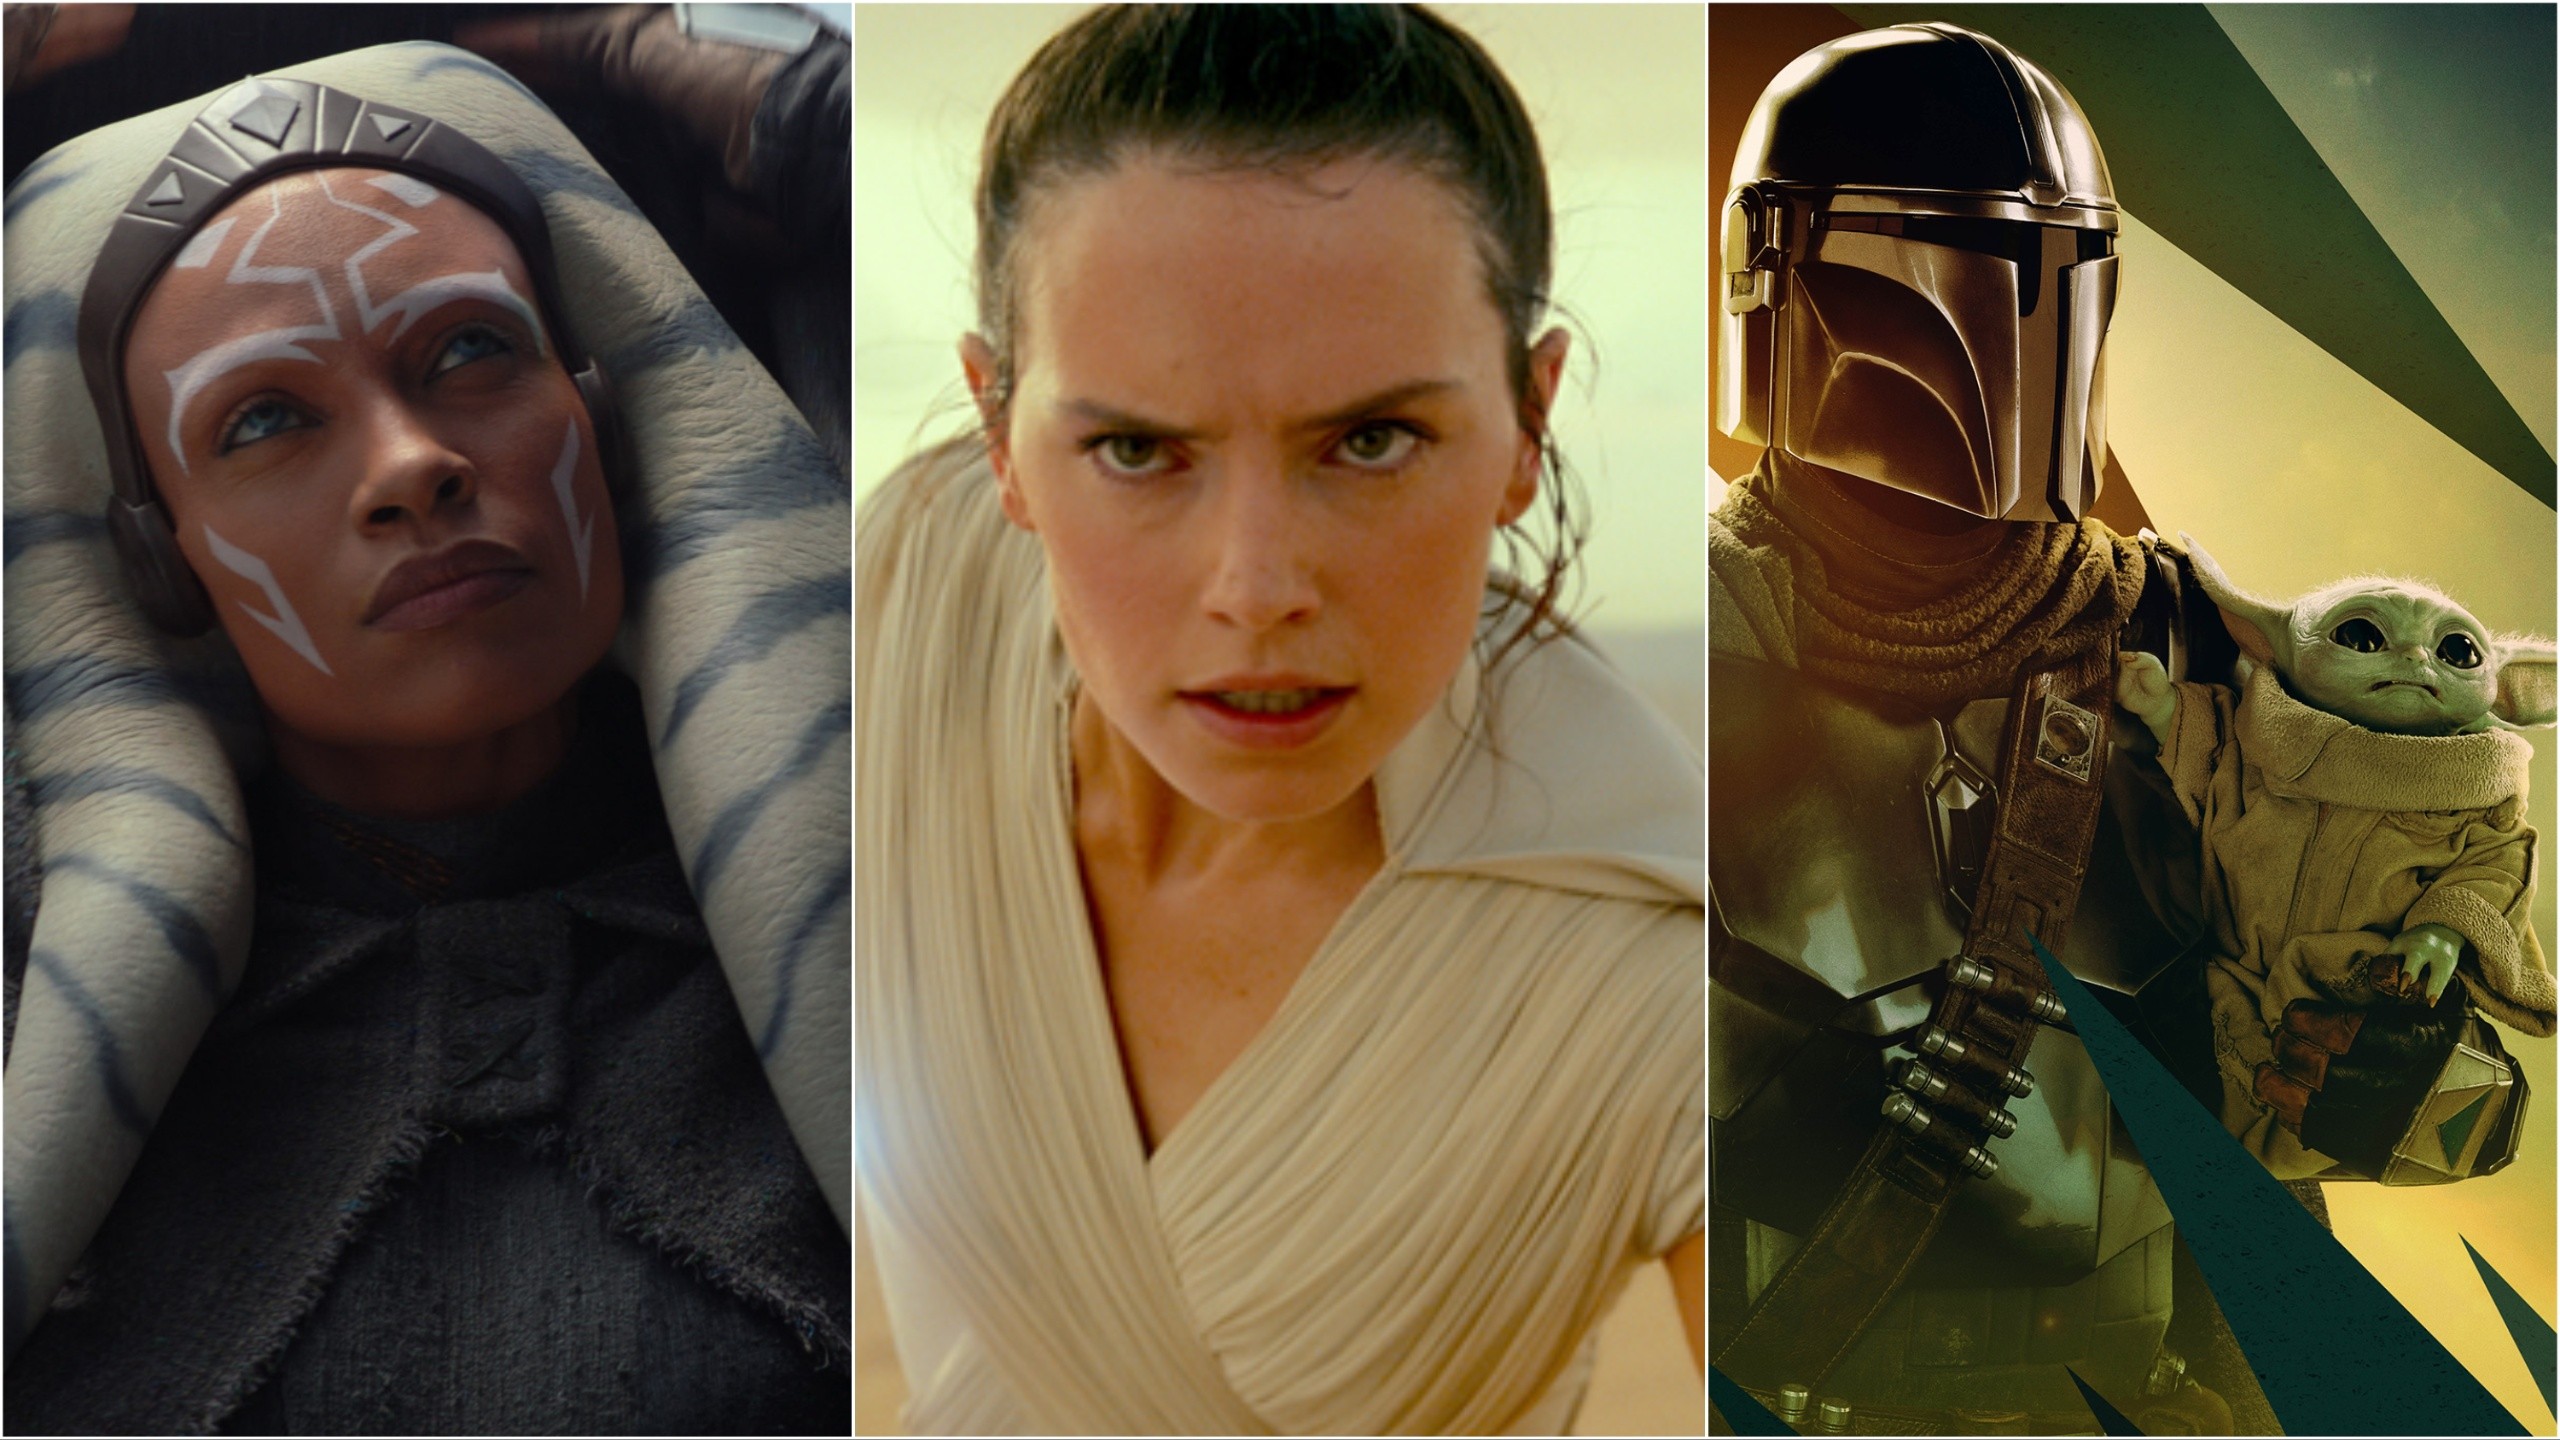 Star Wars Movies and TV Series Release Schedule Which Films